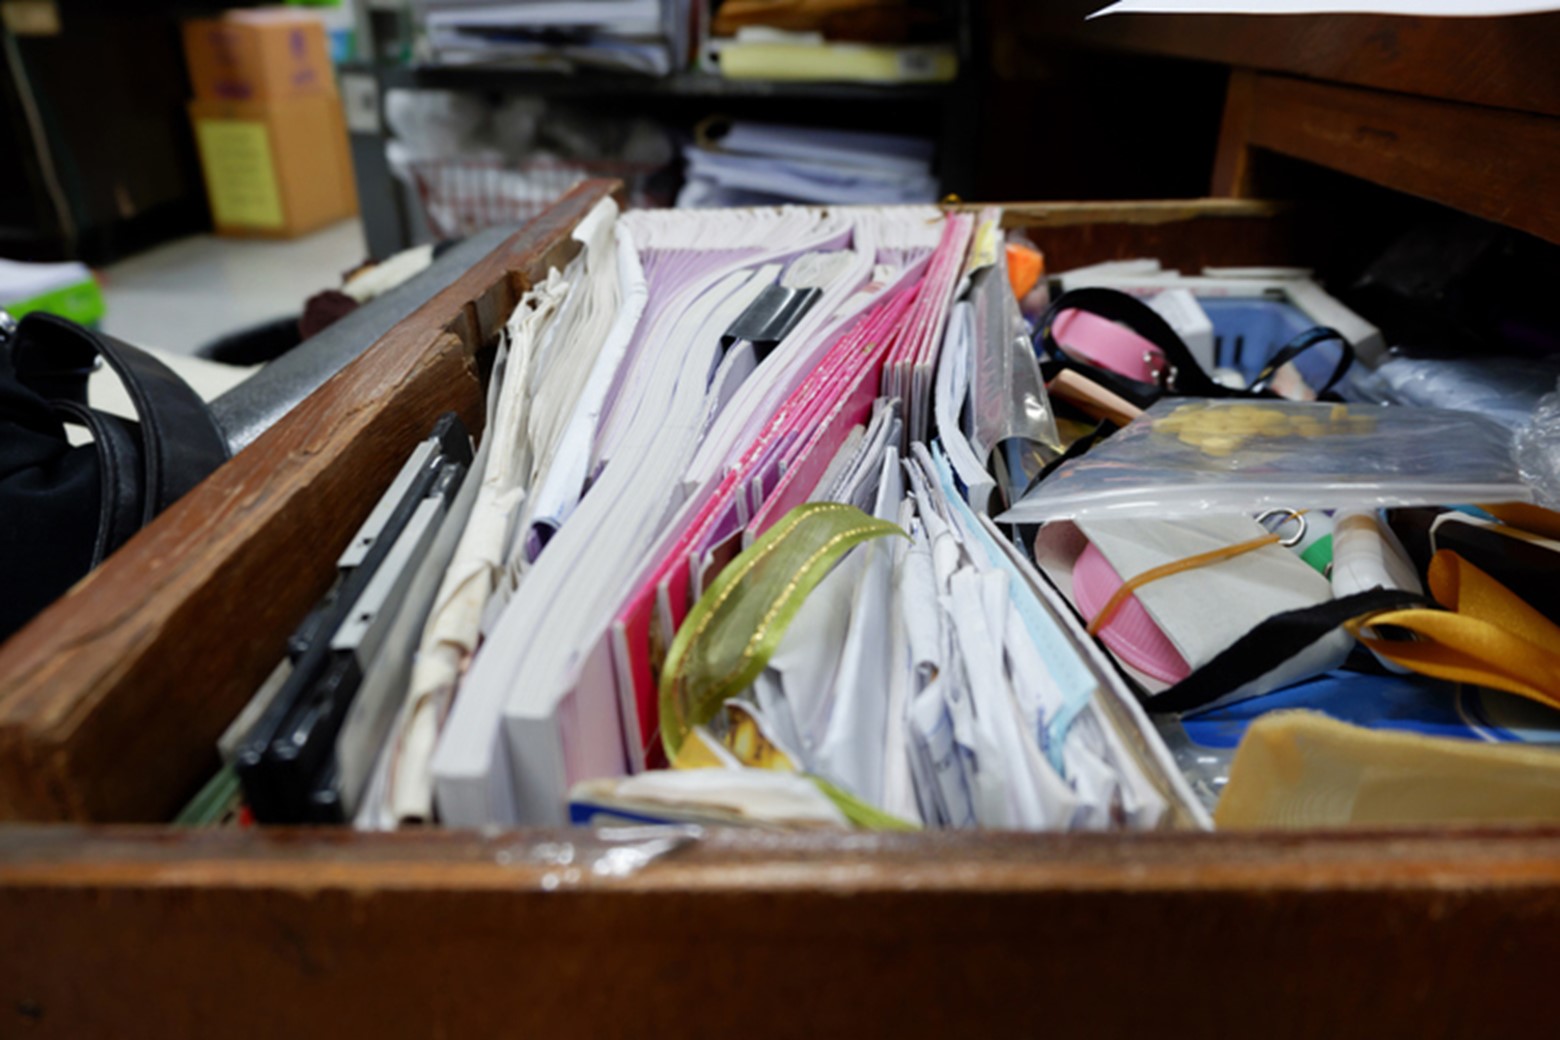 A junk drawer crammed with papers, books, office supplies, and other clutter.